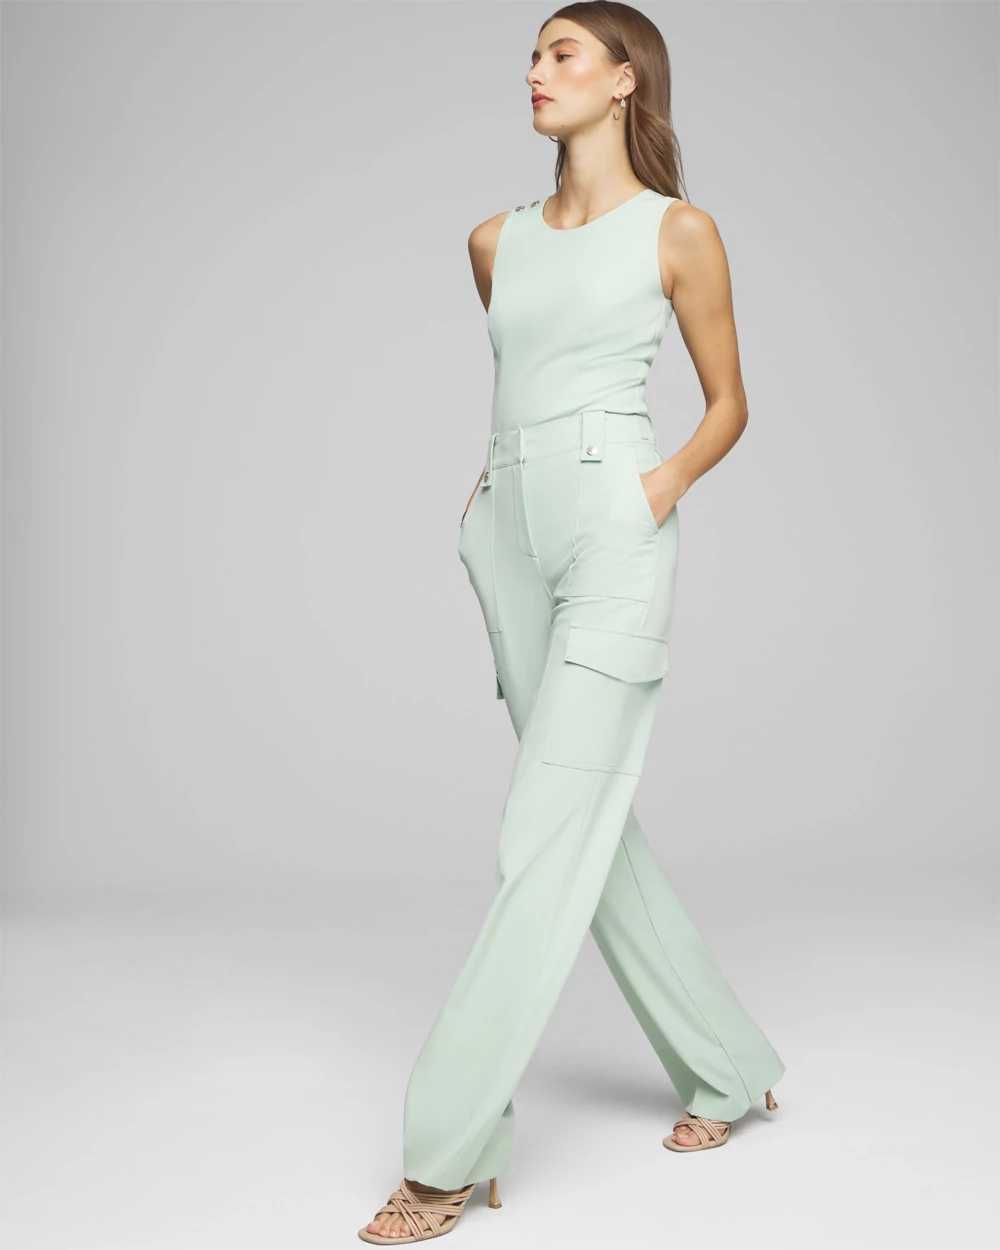 Utility Wide Leg Pants click to view larger image.